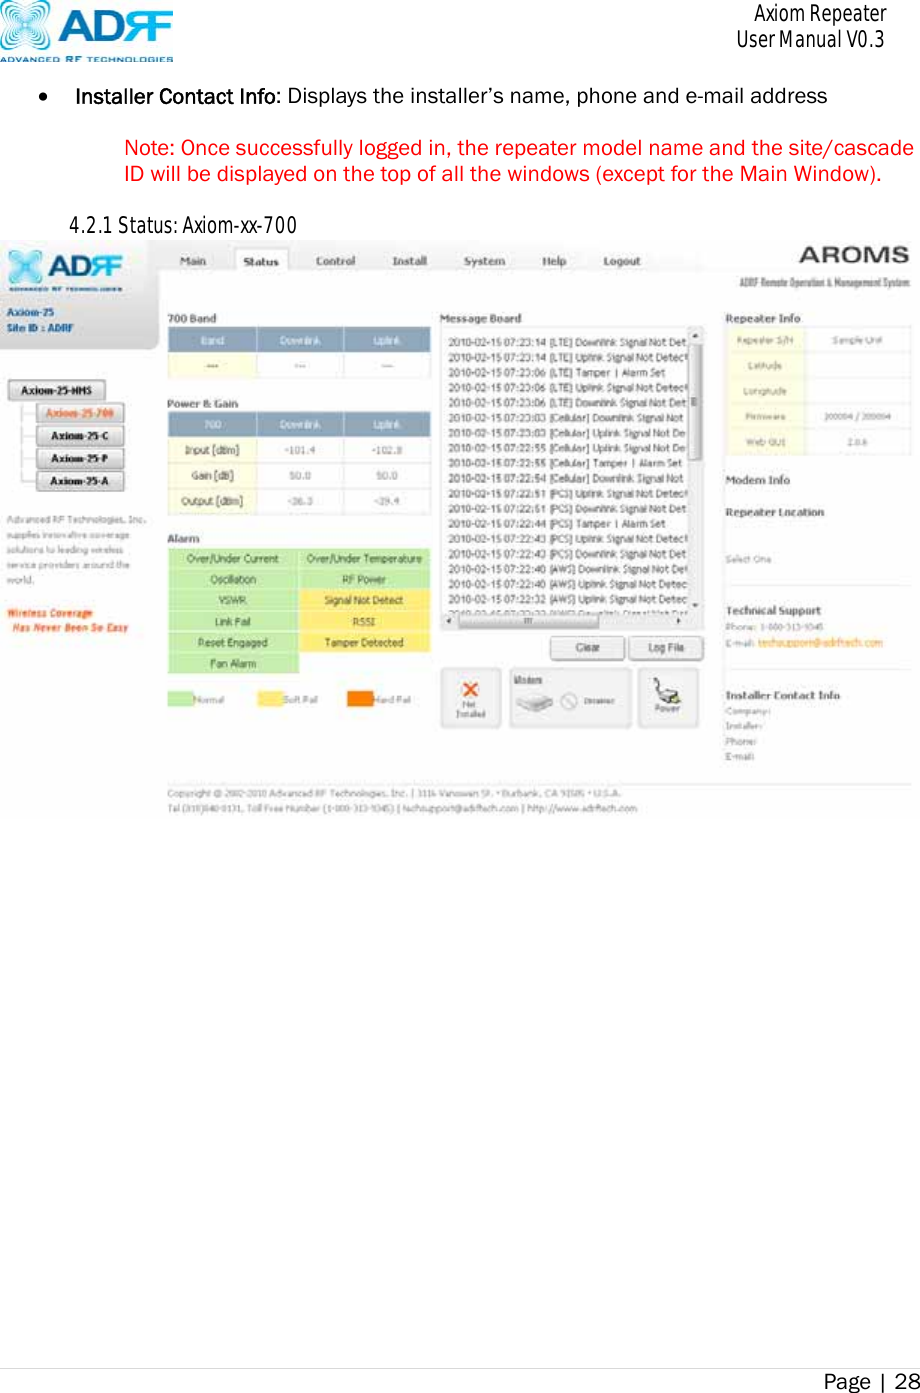       Axiom Repeater     User Manual V0.3 Page | 28     Installer Contact Info: Displays the installer’s name, phone and e-mail address  Note: Once successfully logged in, the repeater model name and the site/cascade ID will be displayed on the top of all the windows (except for the Main Window).  4.2.1 Status: Axiom-xx-700  